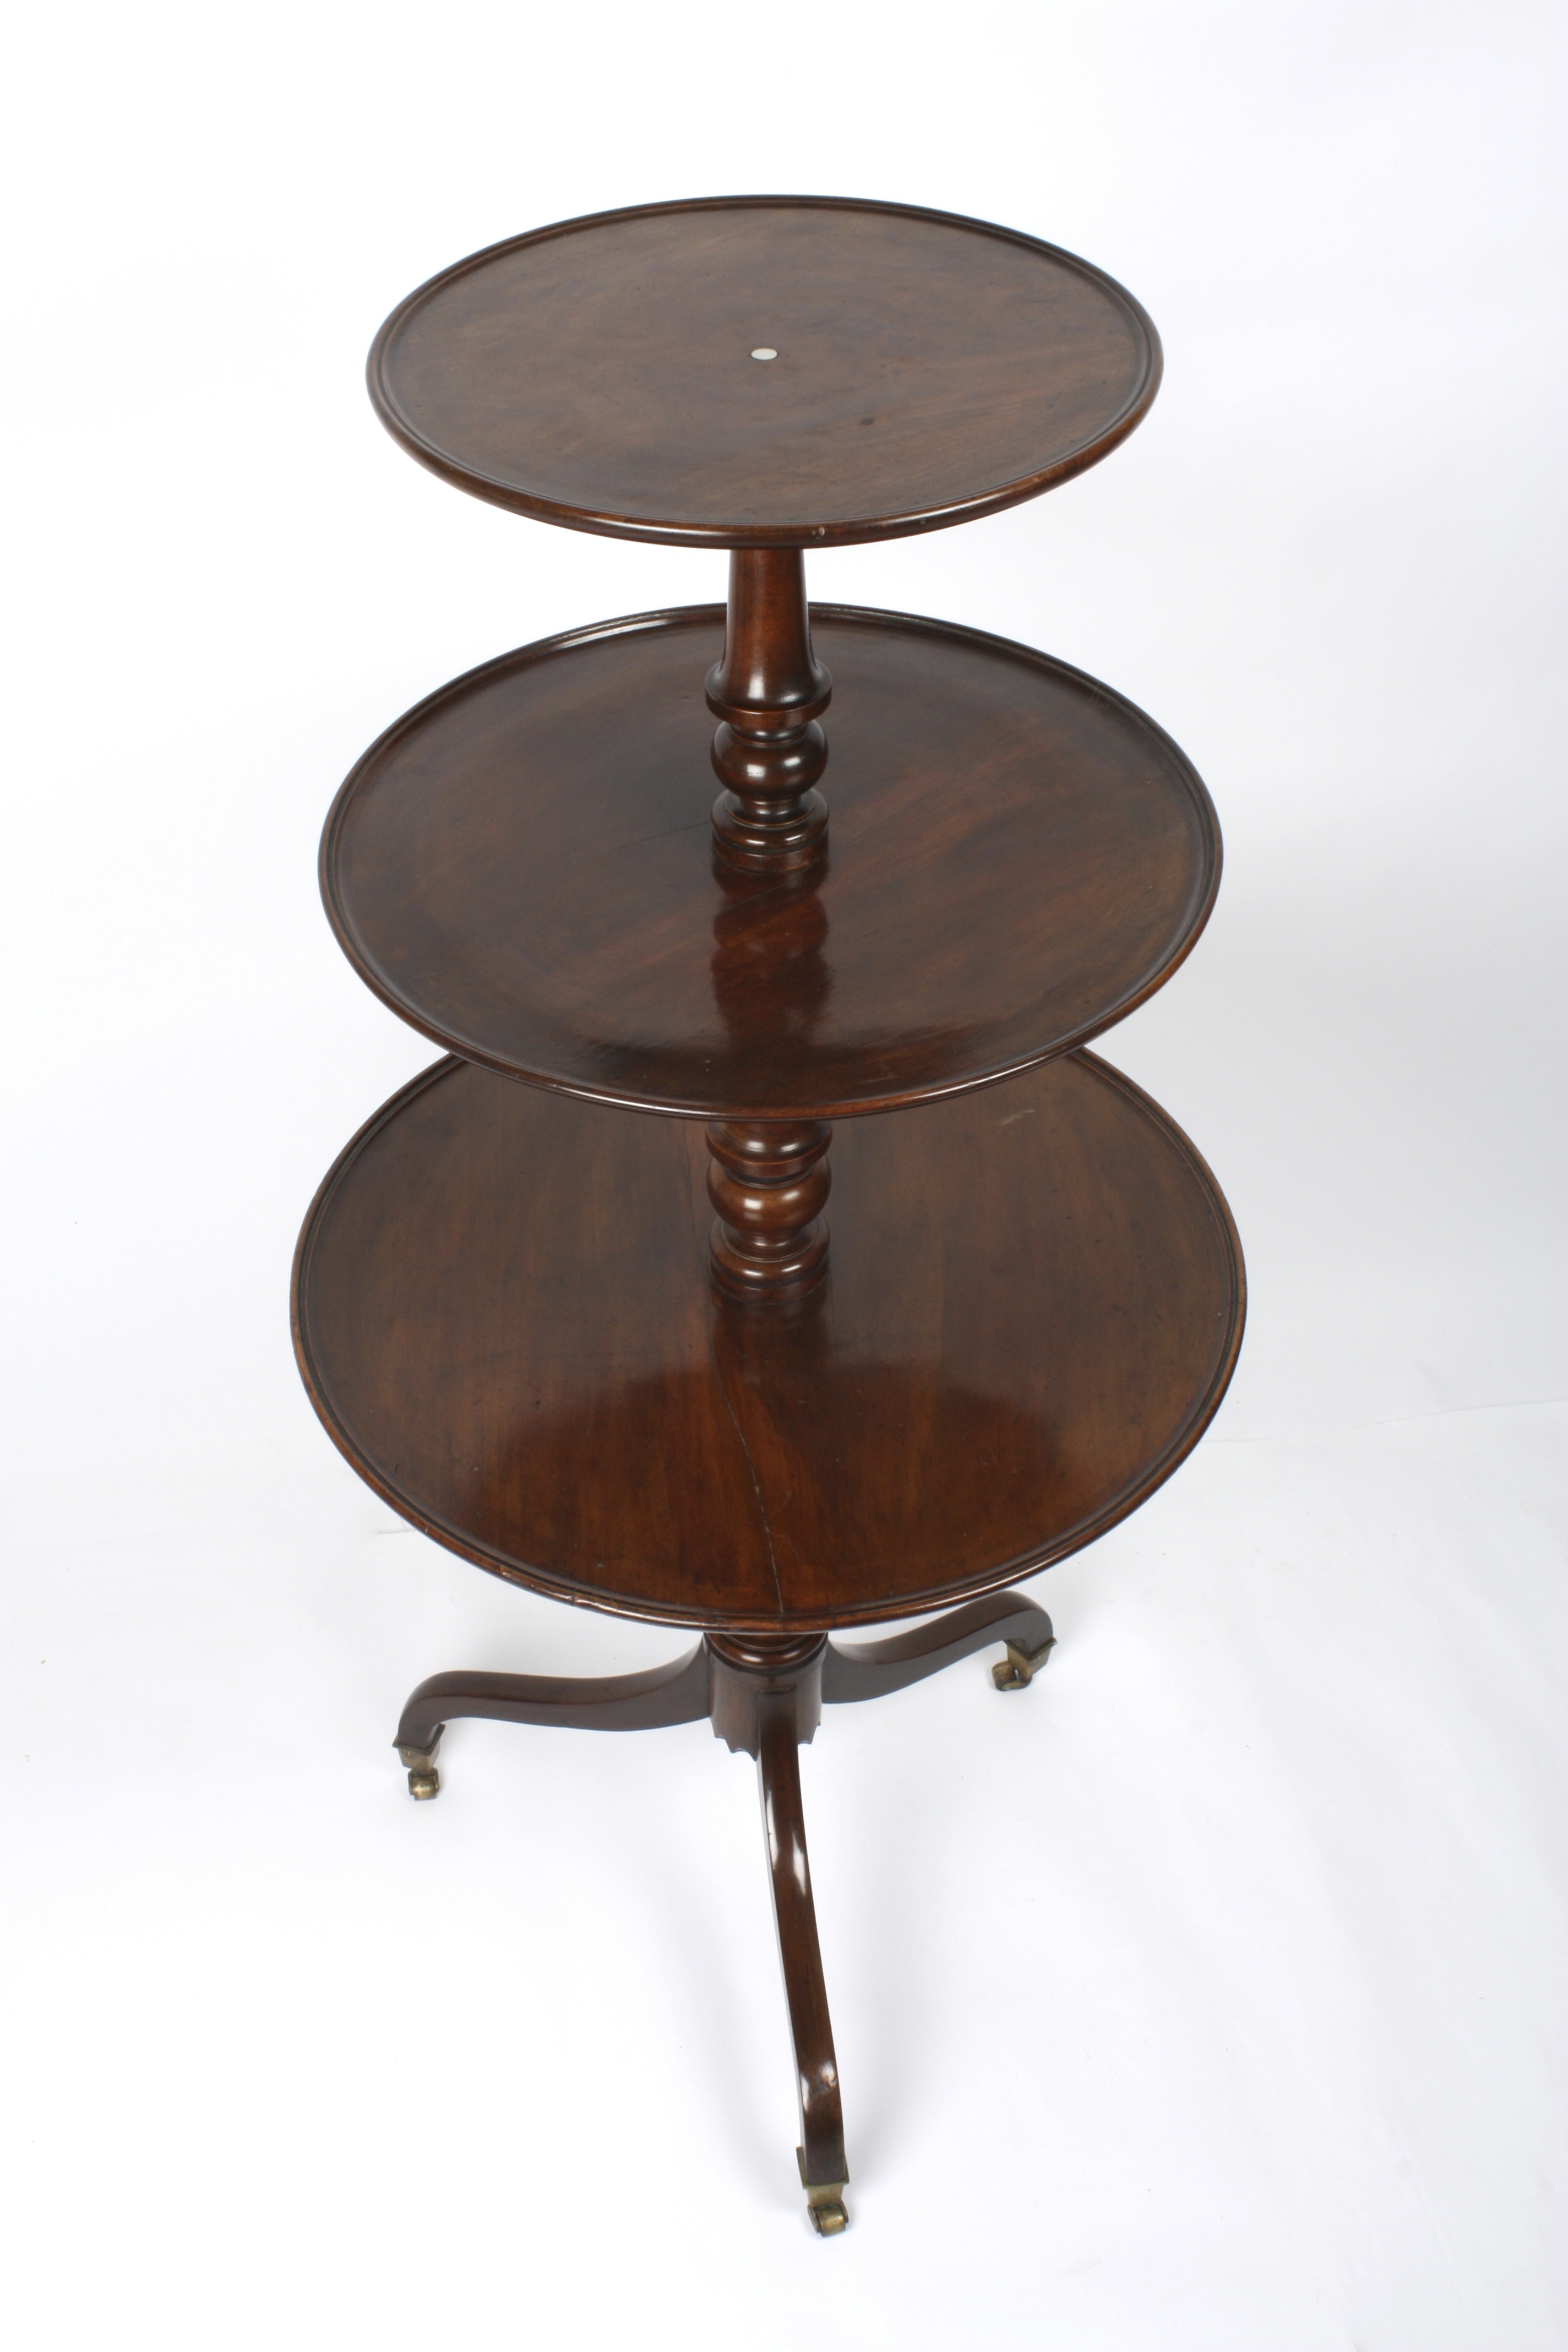 A George III mahogany three tier dumb waiter
with circular graduated tiers and turned columns, - Image 2 of 4